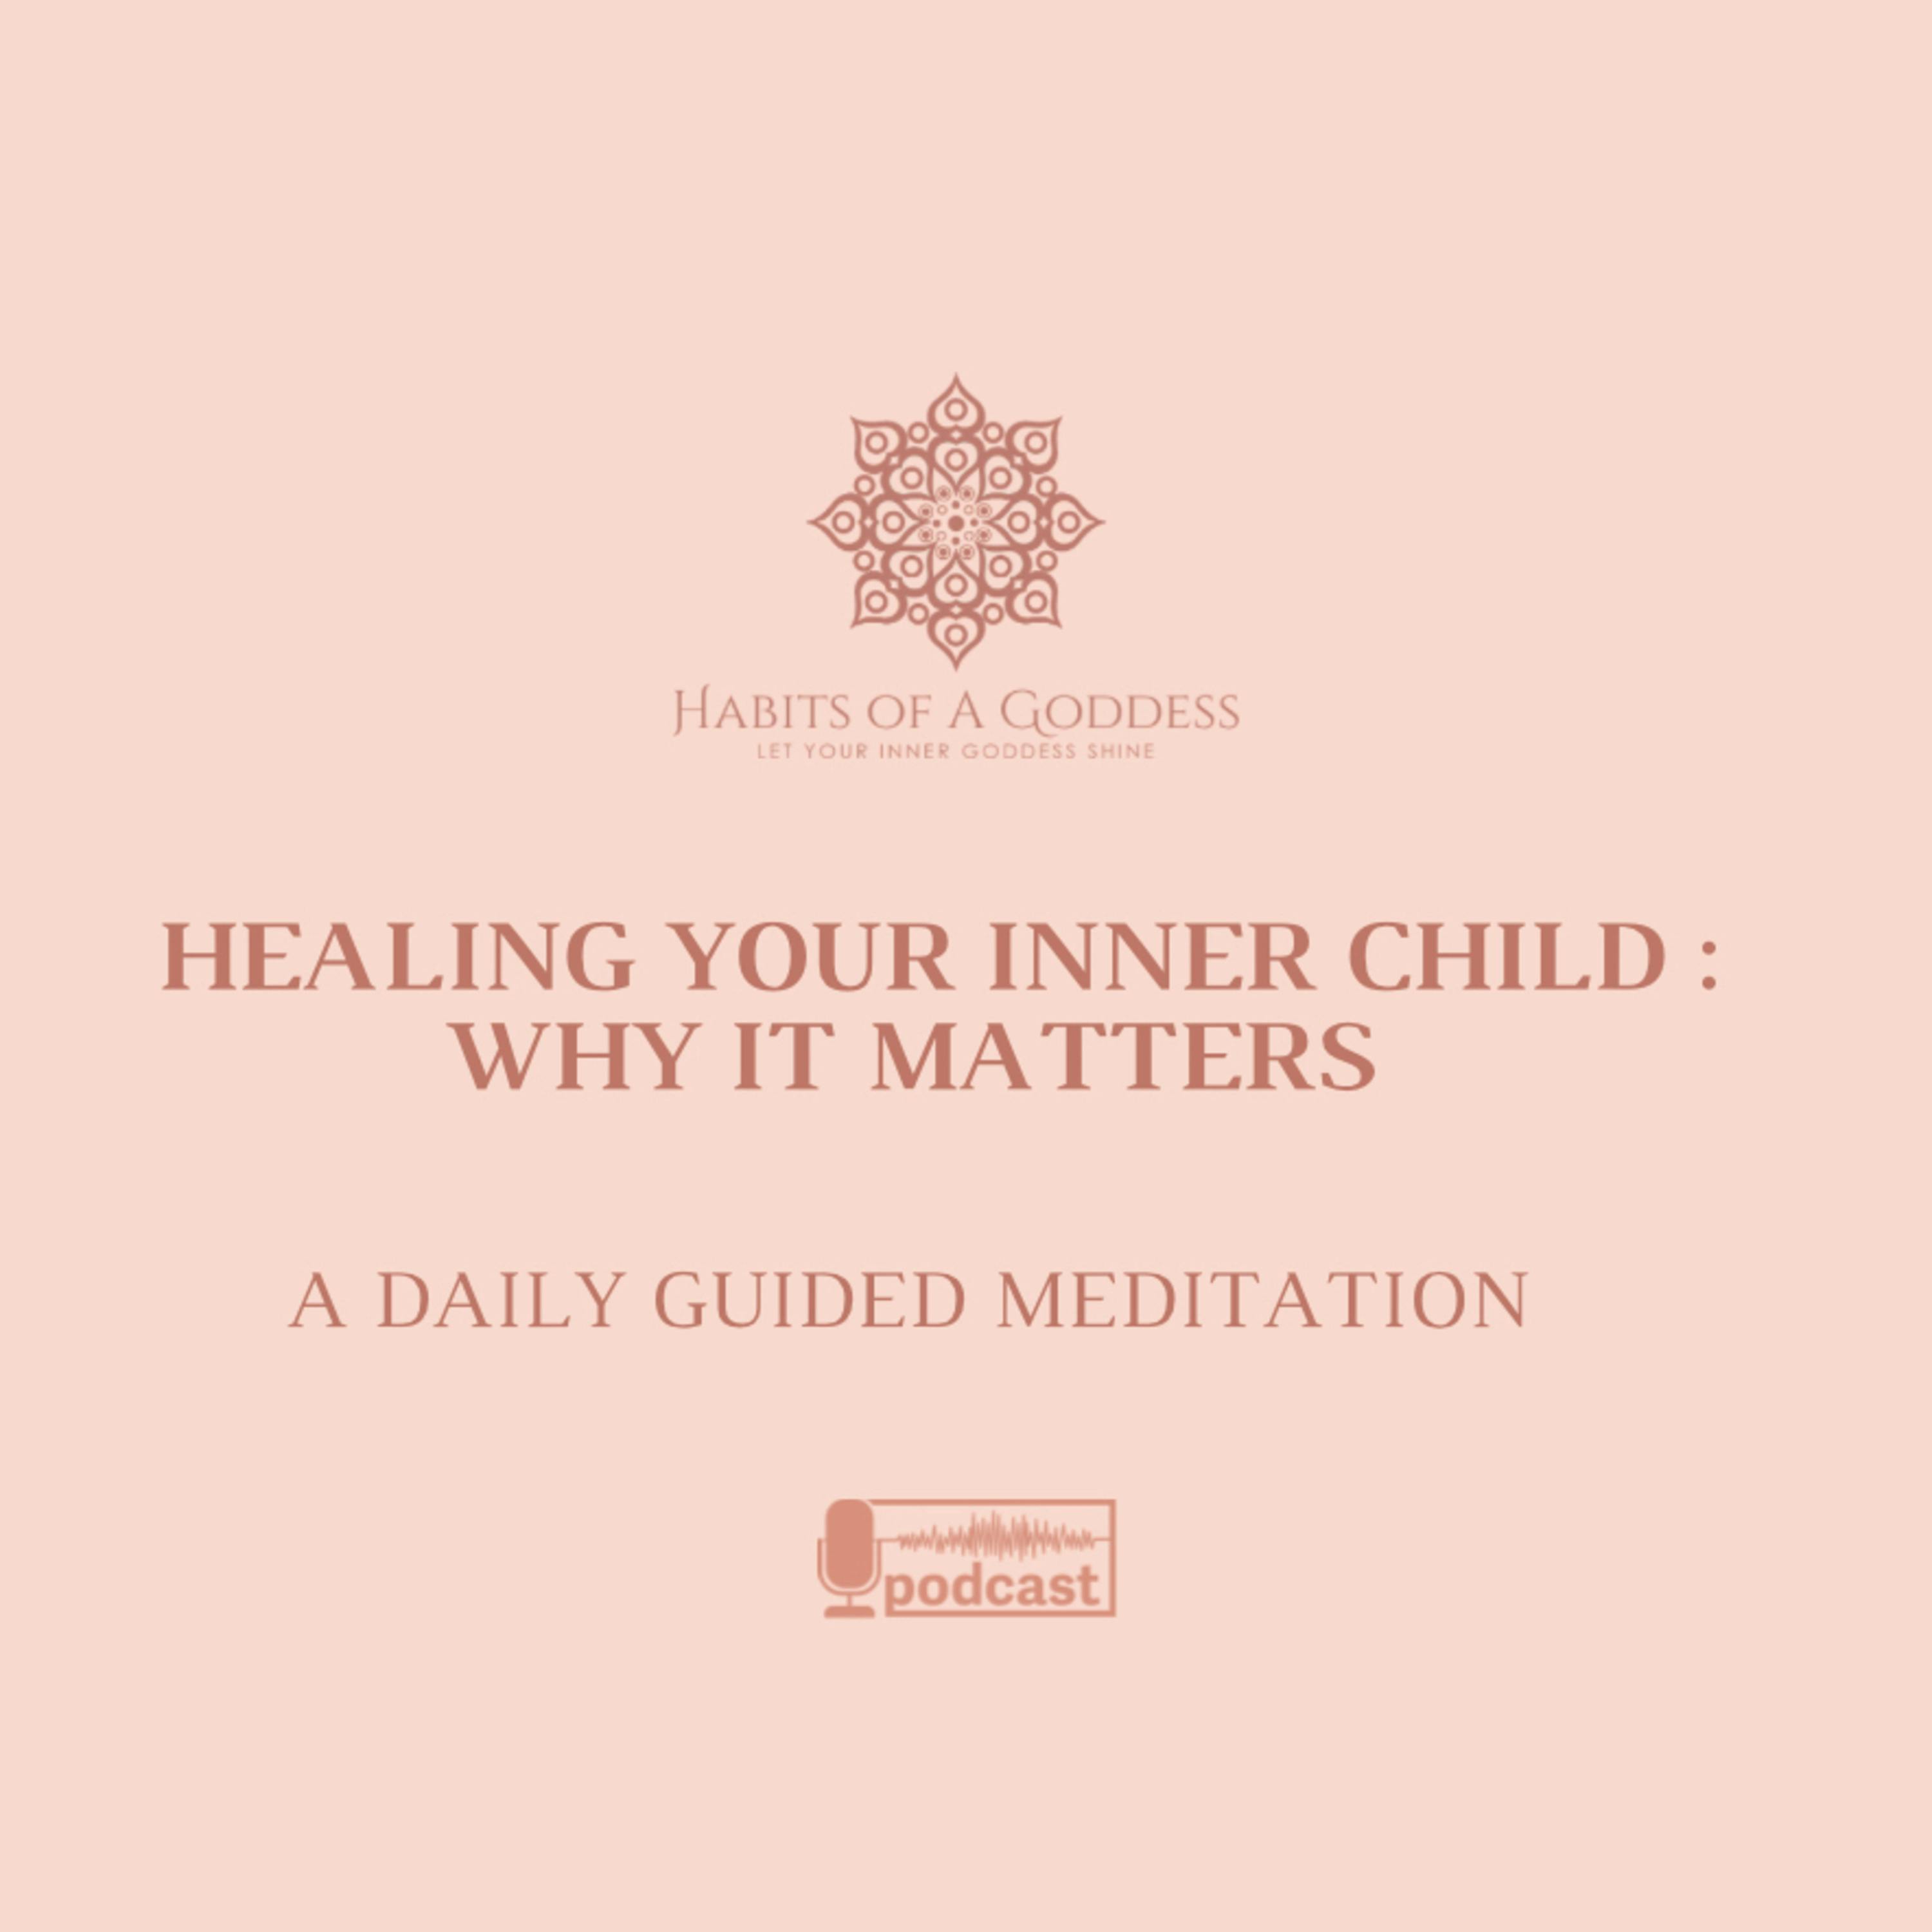 HEALING YOUR INNER CHILD: WHY IT MATTERS | HABITS OF A GODDESS